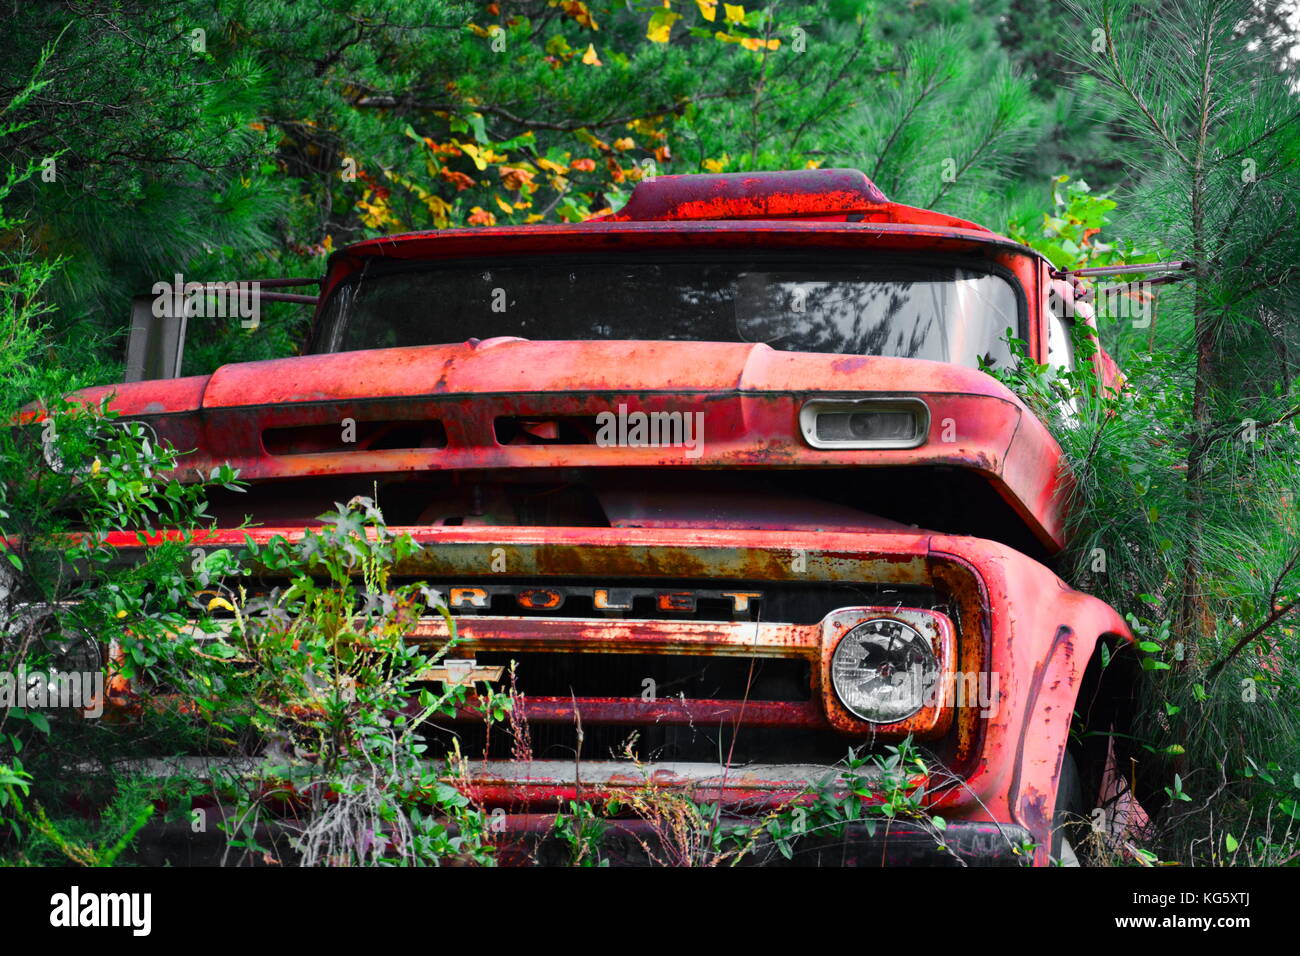 An old Chevy tanker truck, forgotten and ravaged by time. Stock Photo